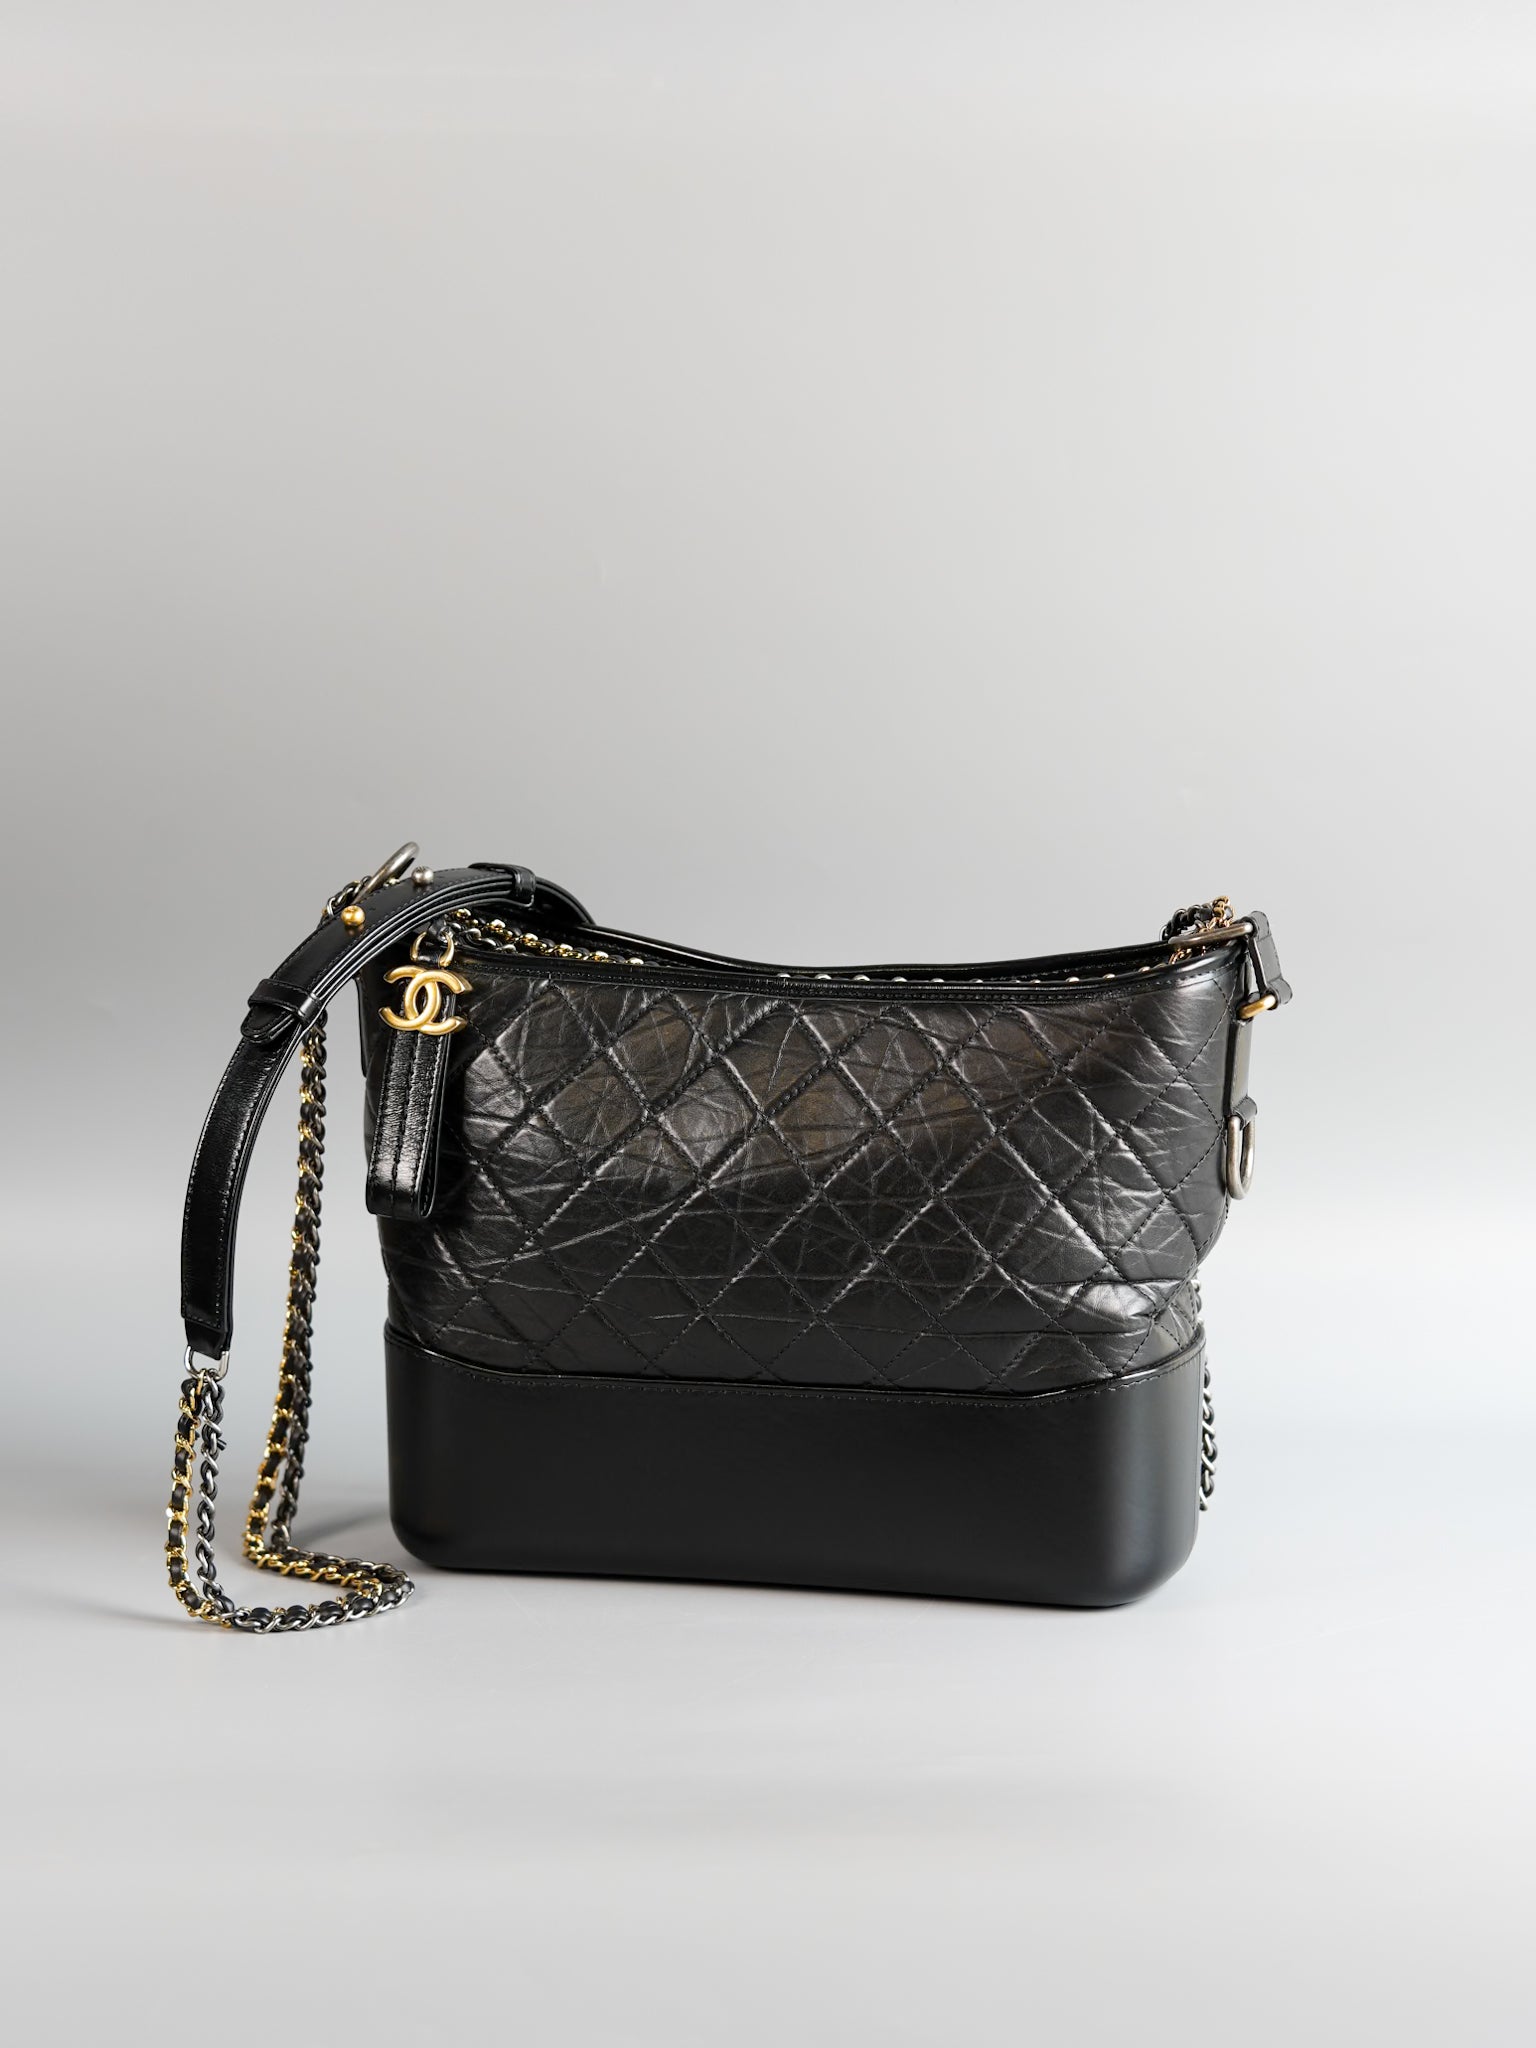 Gabrielle Hobo Old Medium (Large) in Black Quilted Distressed Calfskin & Mixed Hardware (Series 27) | Purse Maison Luxury Bags Shop